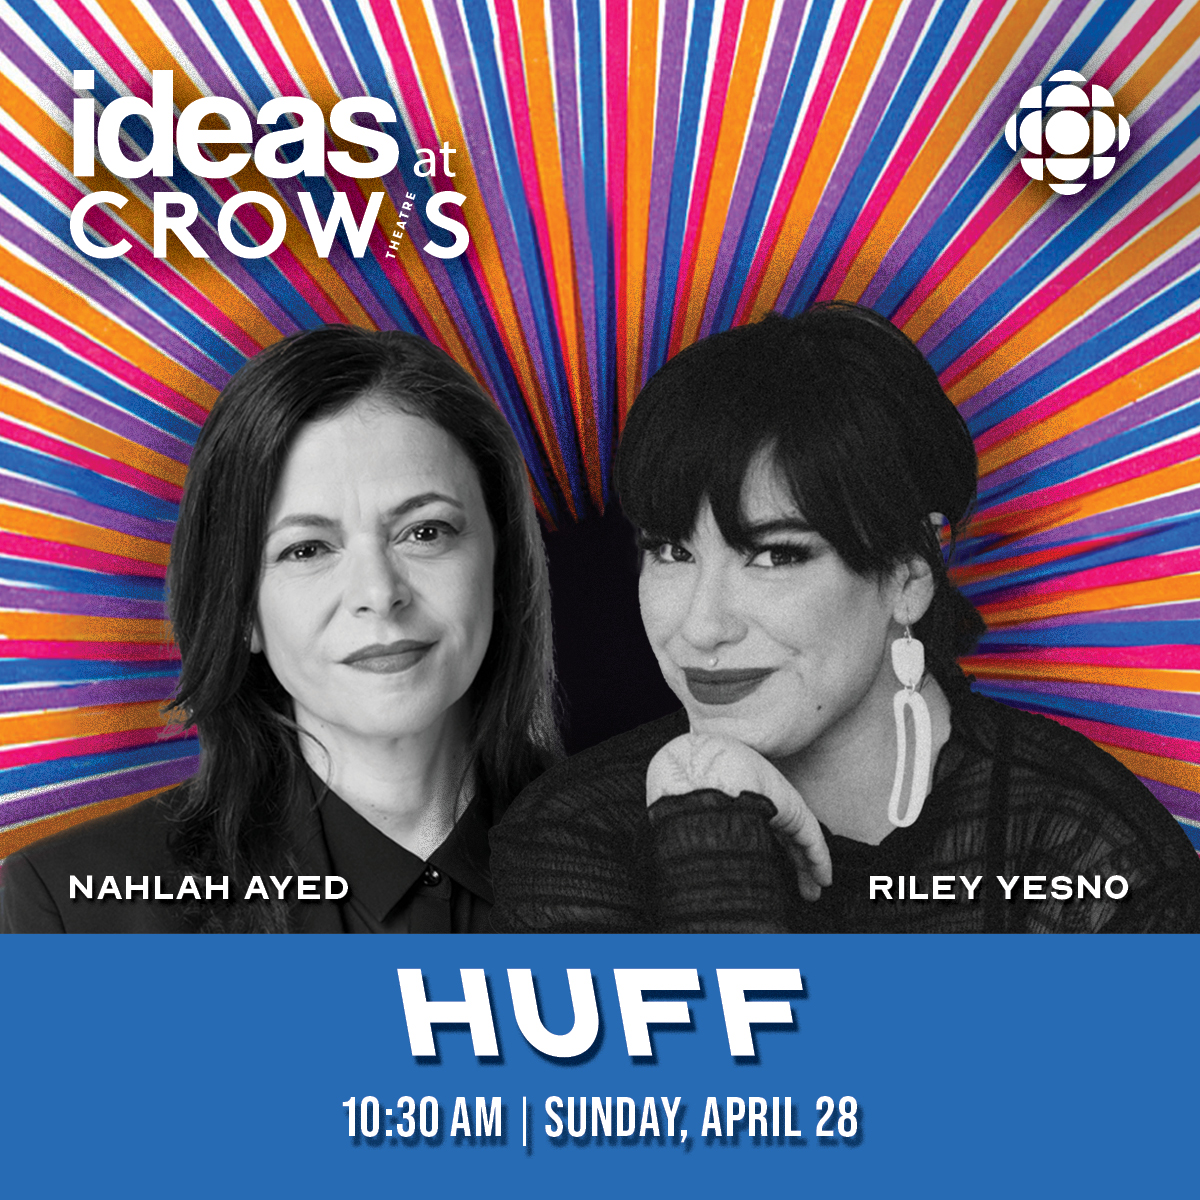 Anishinaabe scholar Riley Yesno will explore Indigenous futurism and the connection between dreams and new realities, inspired by Cliff Cardinal's HUFF. April 28 @ 10:30am 🎟 Free ticket to IDEAS: ow.ly/Kljc50Reai2 🎟 Ticket to HUFF: ow.ly/YpYj50ReahZ